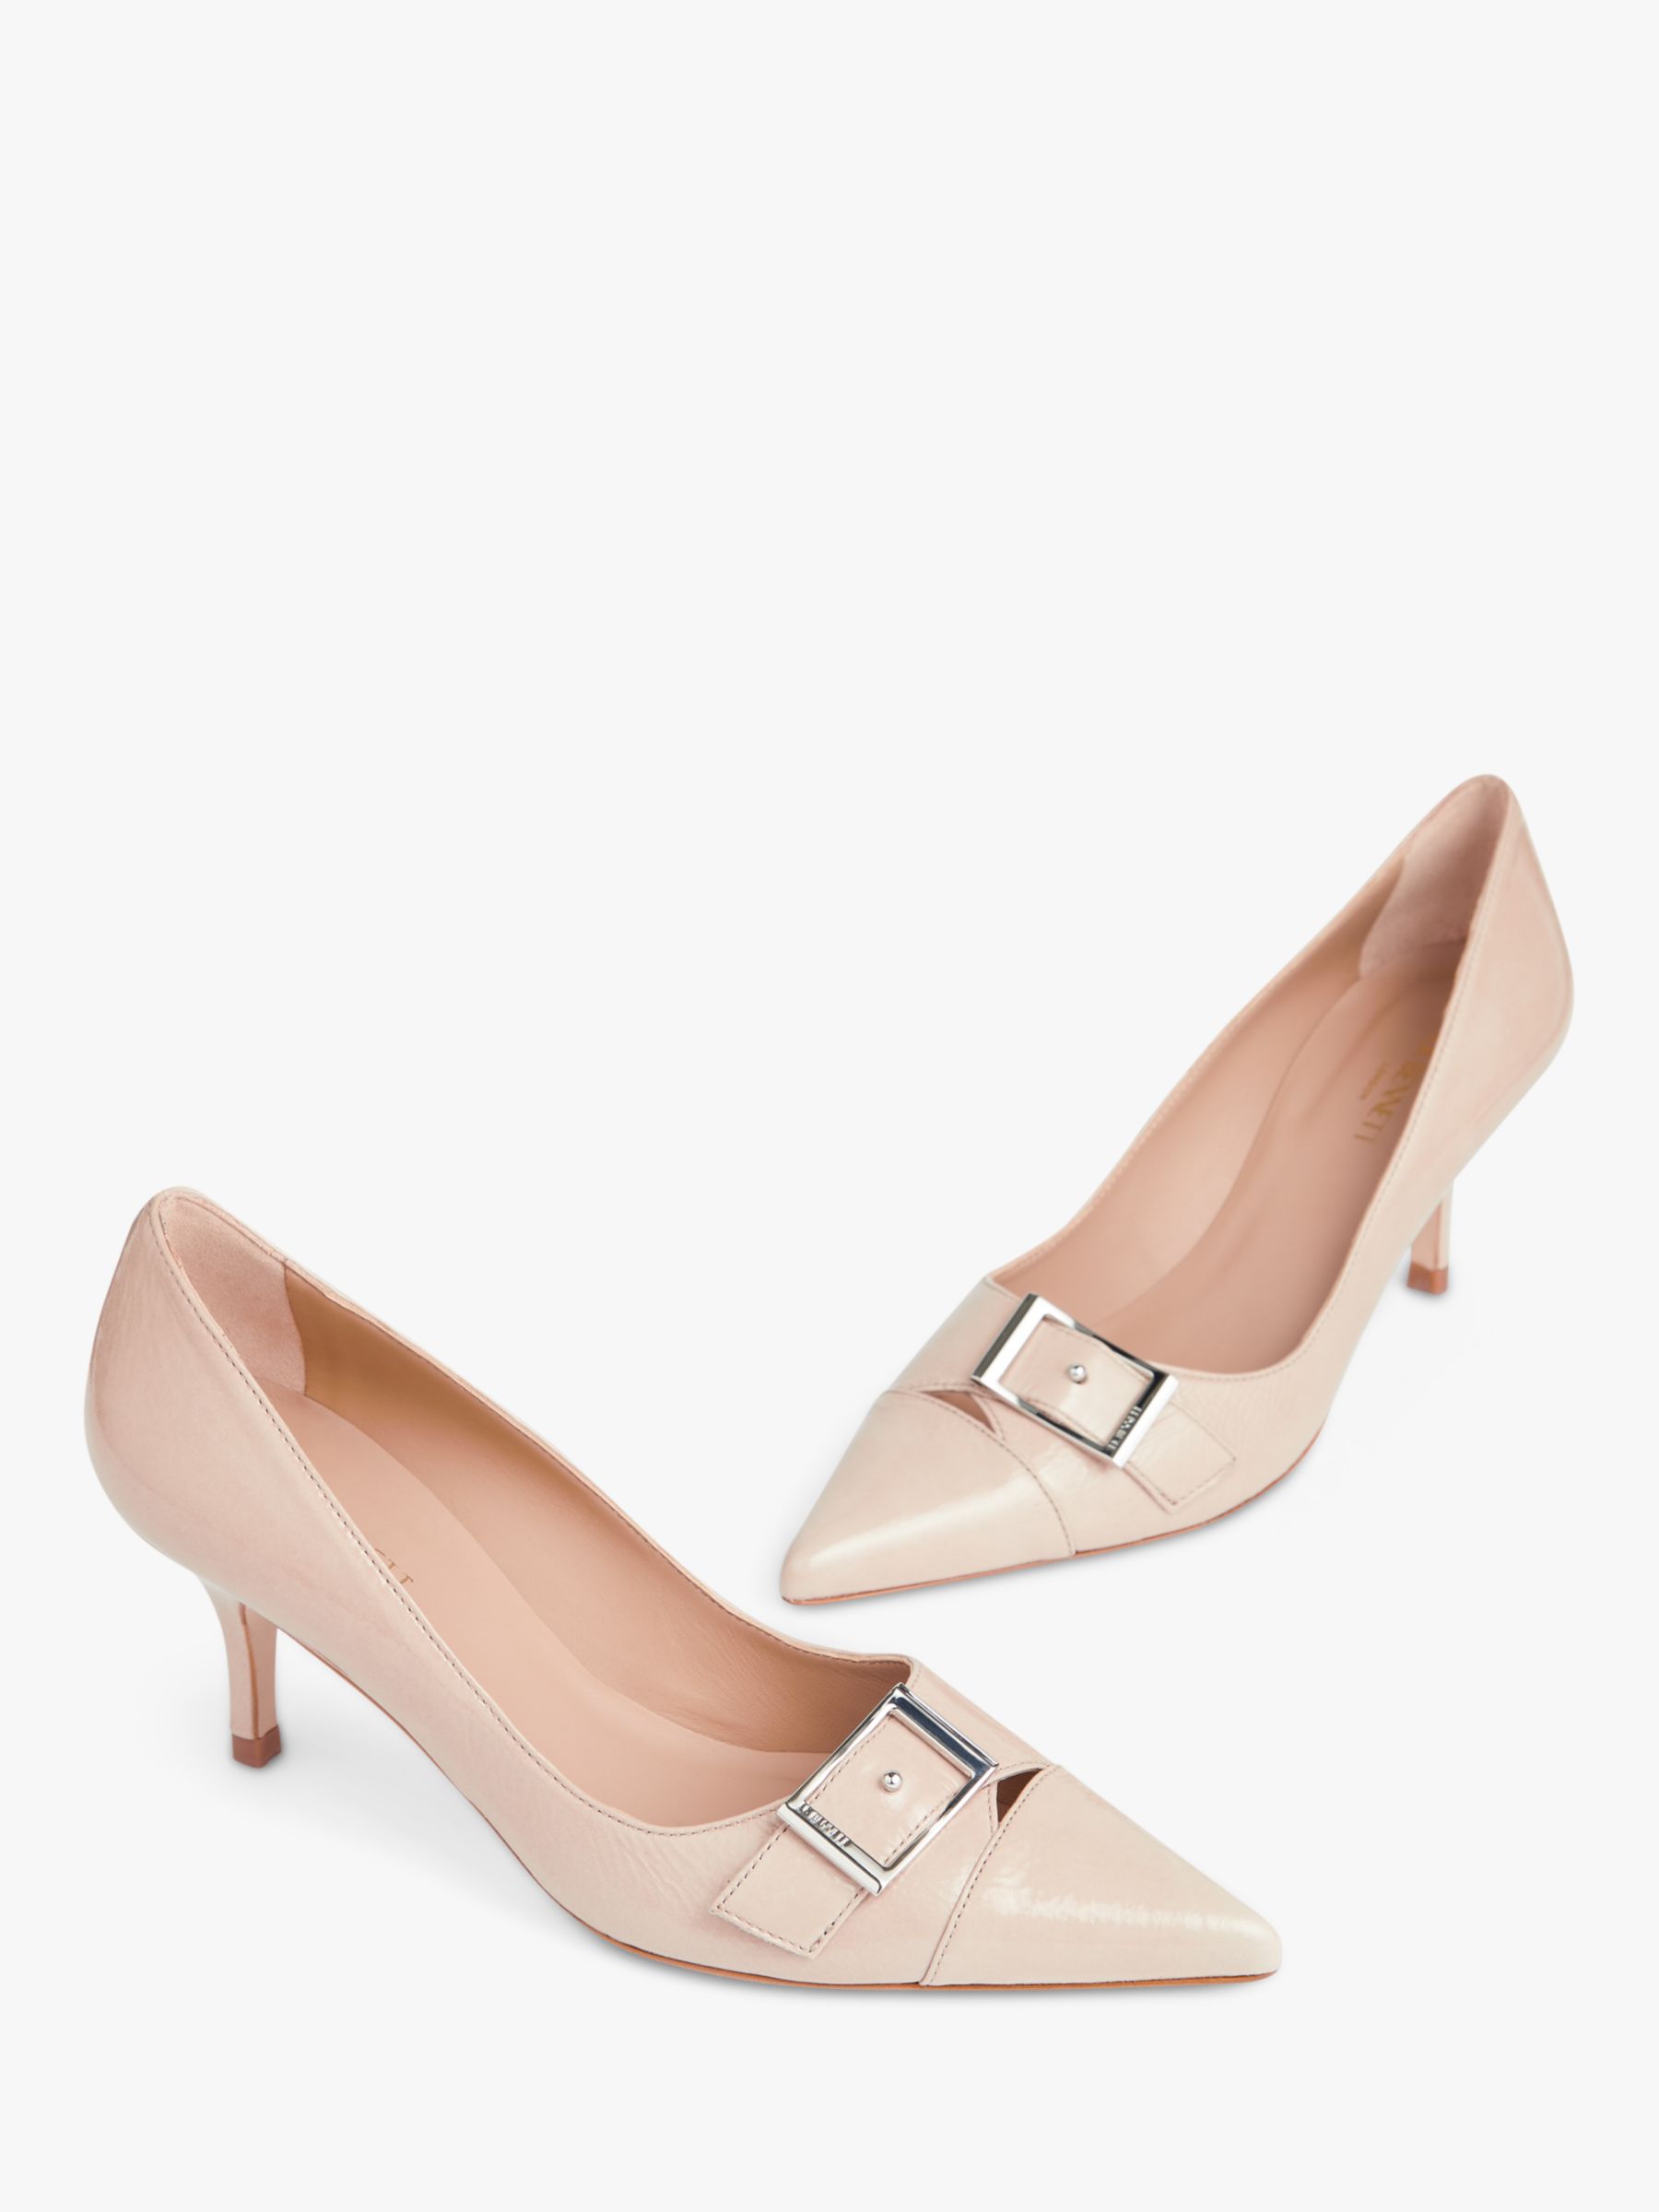 Buy L.K.Bennett Billie Nappa Leather Pointed Court Shoes Online at johnlewis.com